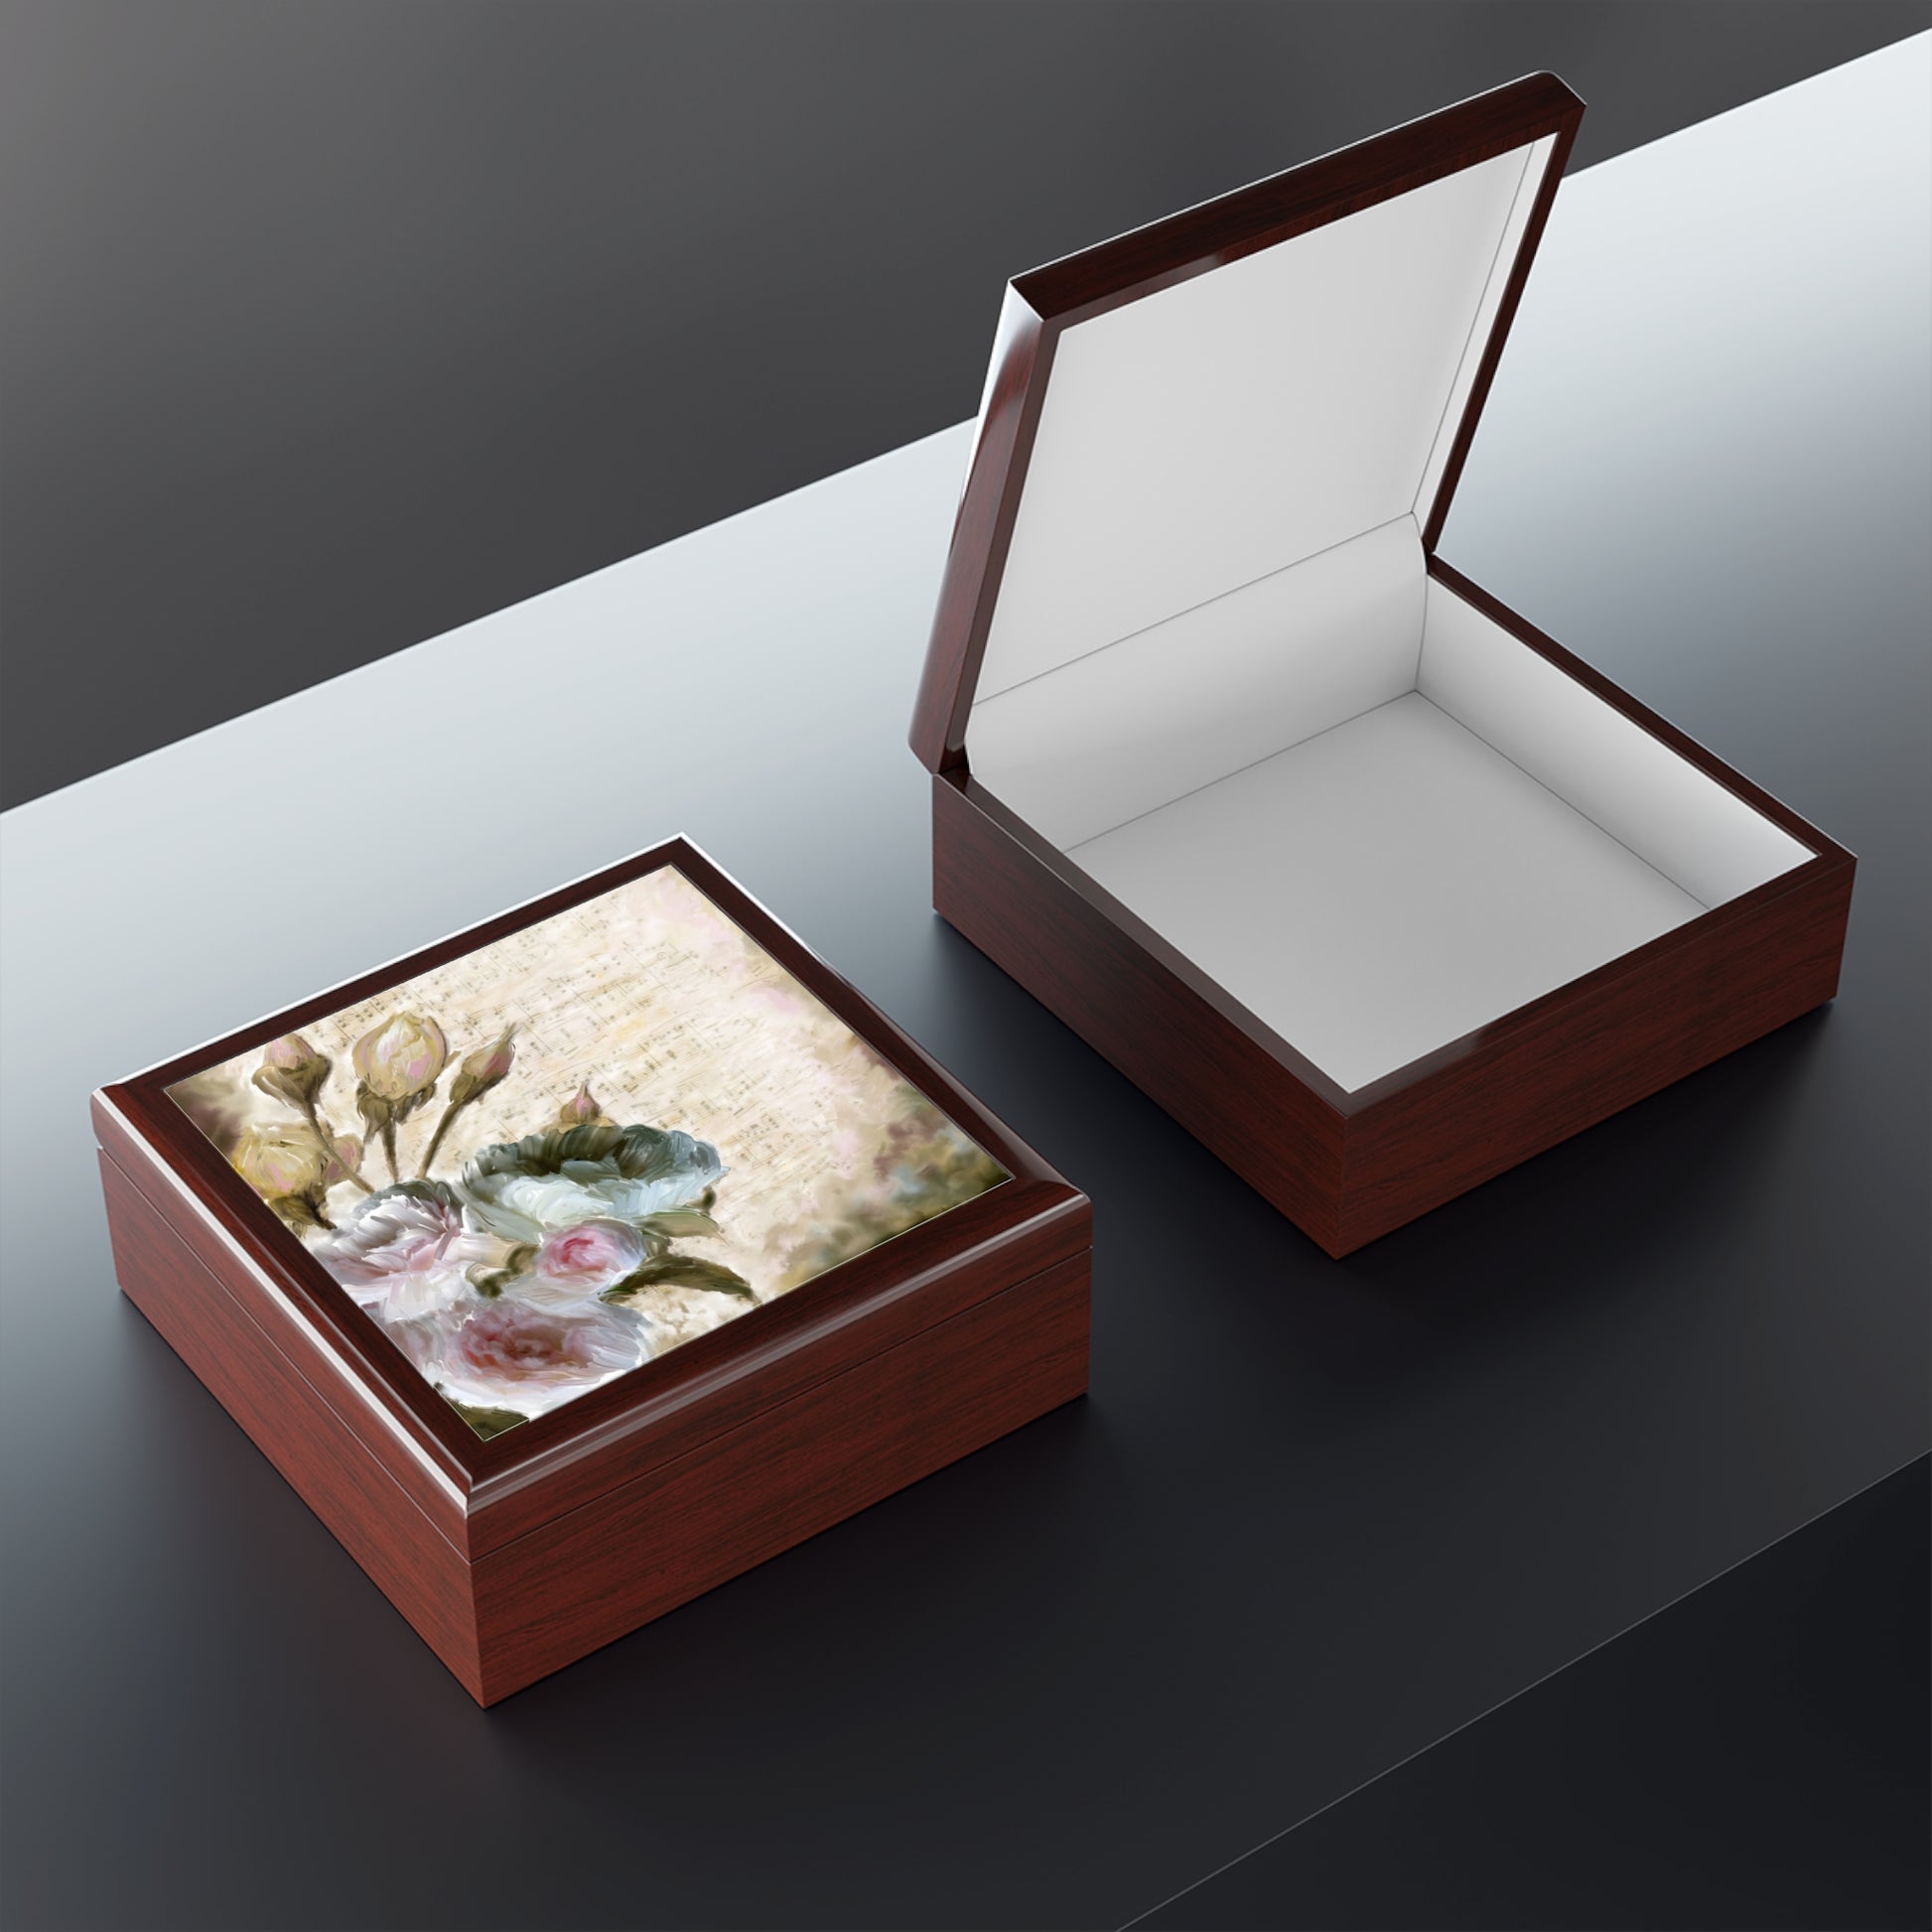 Lacquered Wood Keepsake/Jewelry Box - Roses and Music Notes with lid open